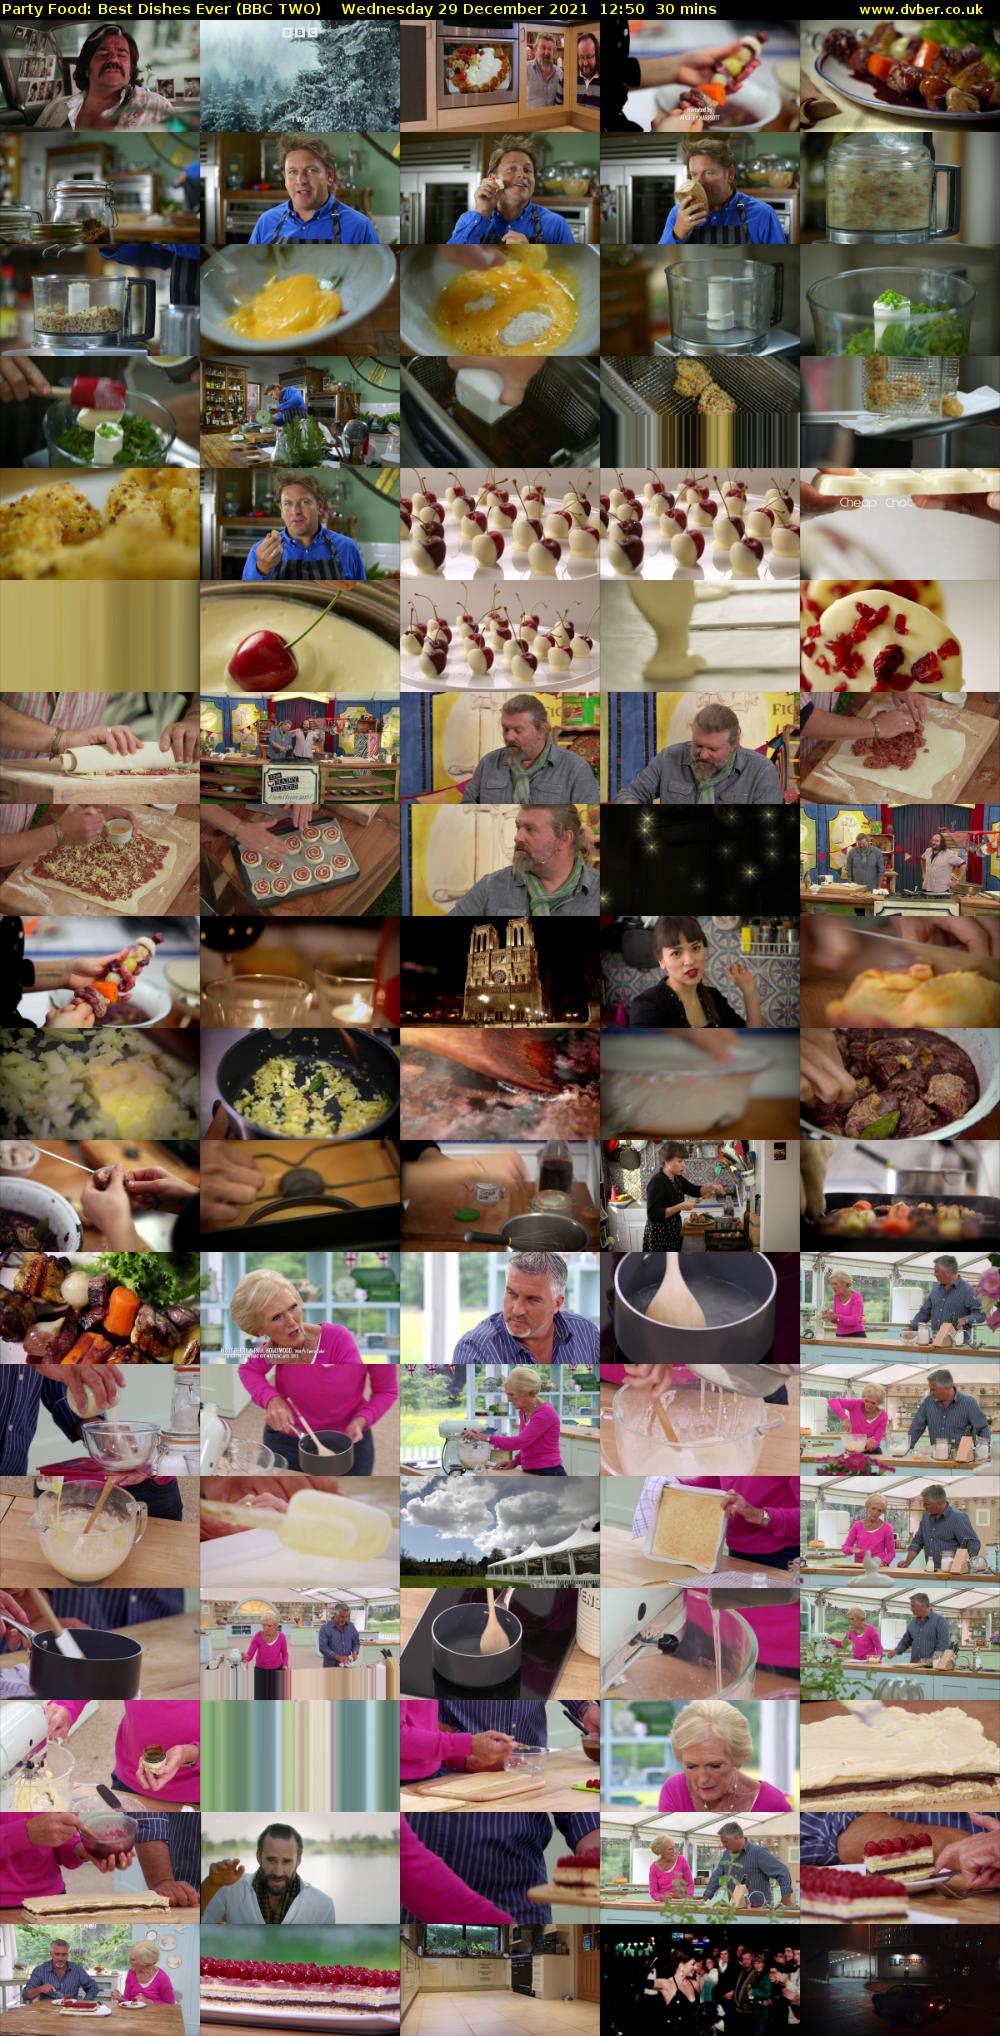 Party Food: Best Dishes Ever (BBC TWO) Wednesday 29 December 2021 12:50 - 13:20